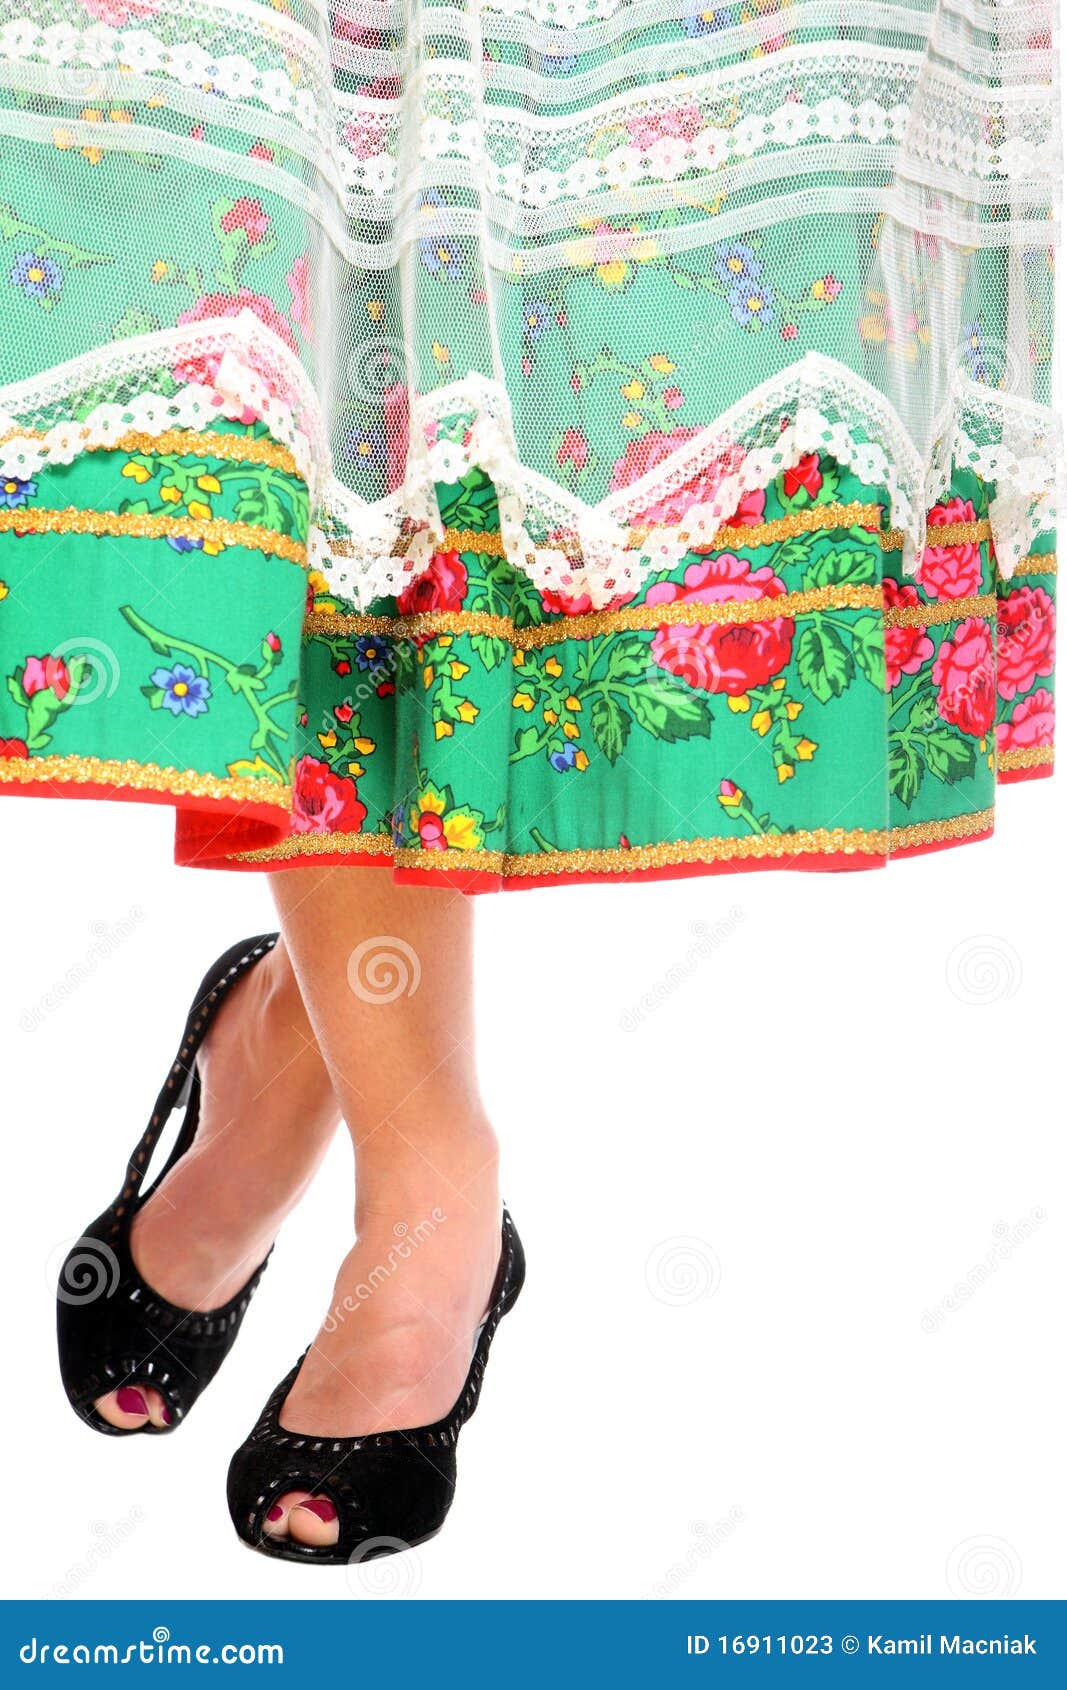 Polish Girl in a Traditional Outfit Stock Image - Image of outfit ...